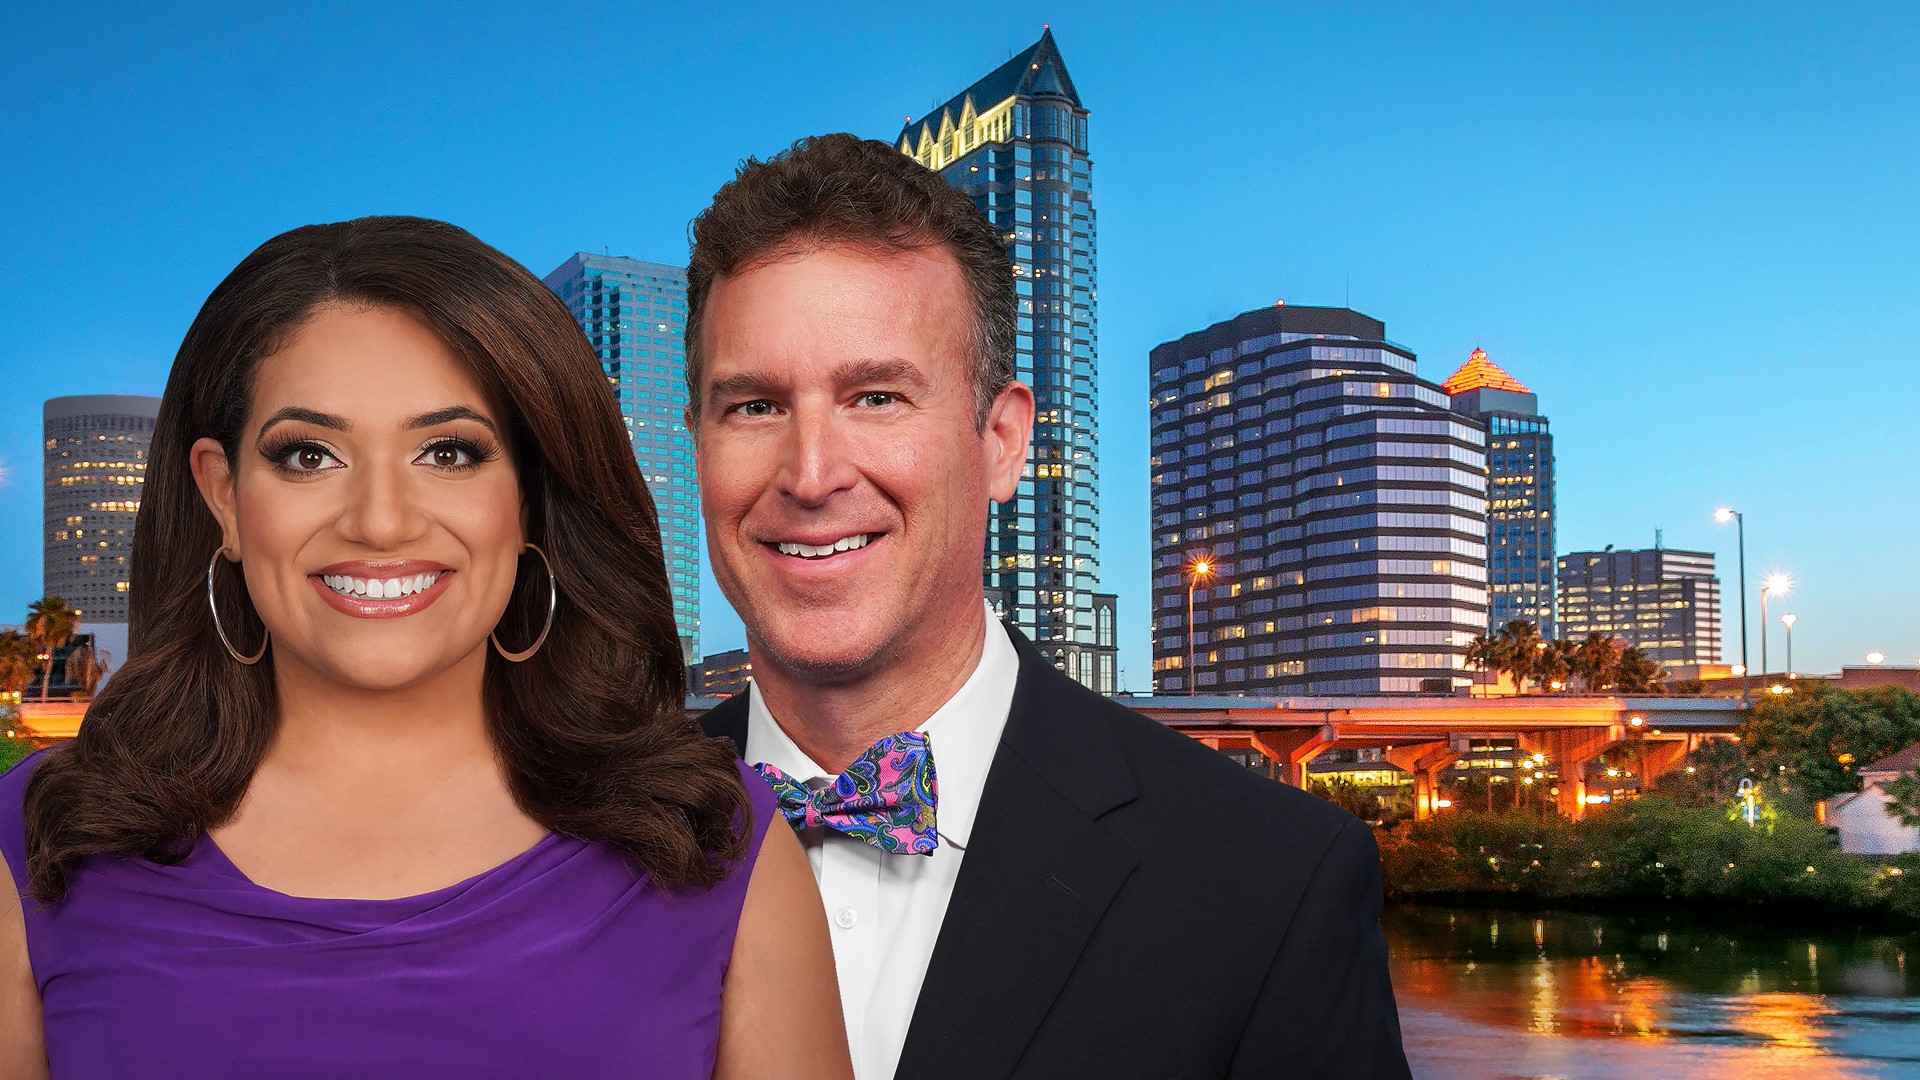 From lifestyle interviews to live breaking news coverage, the AM crew brings you everything you need to know to plan your weekend, including the latest forecast.